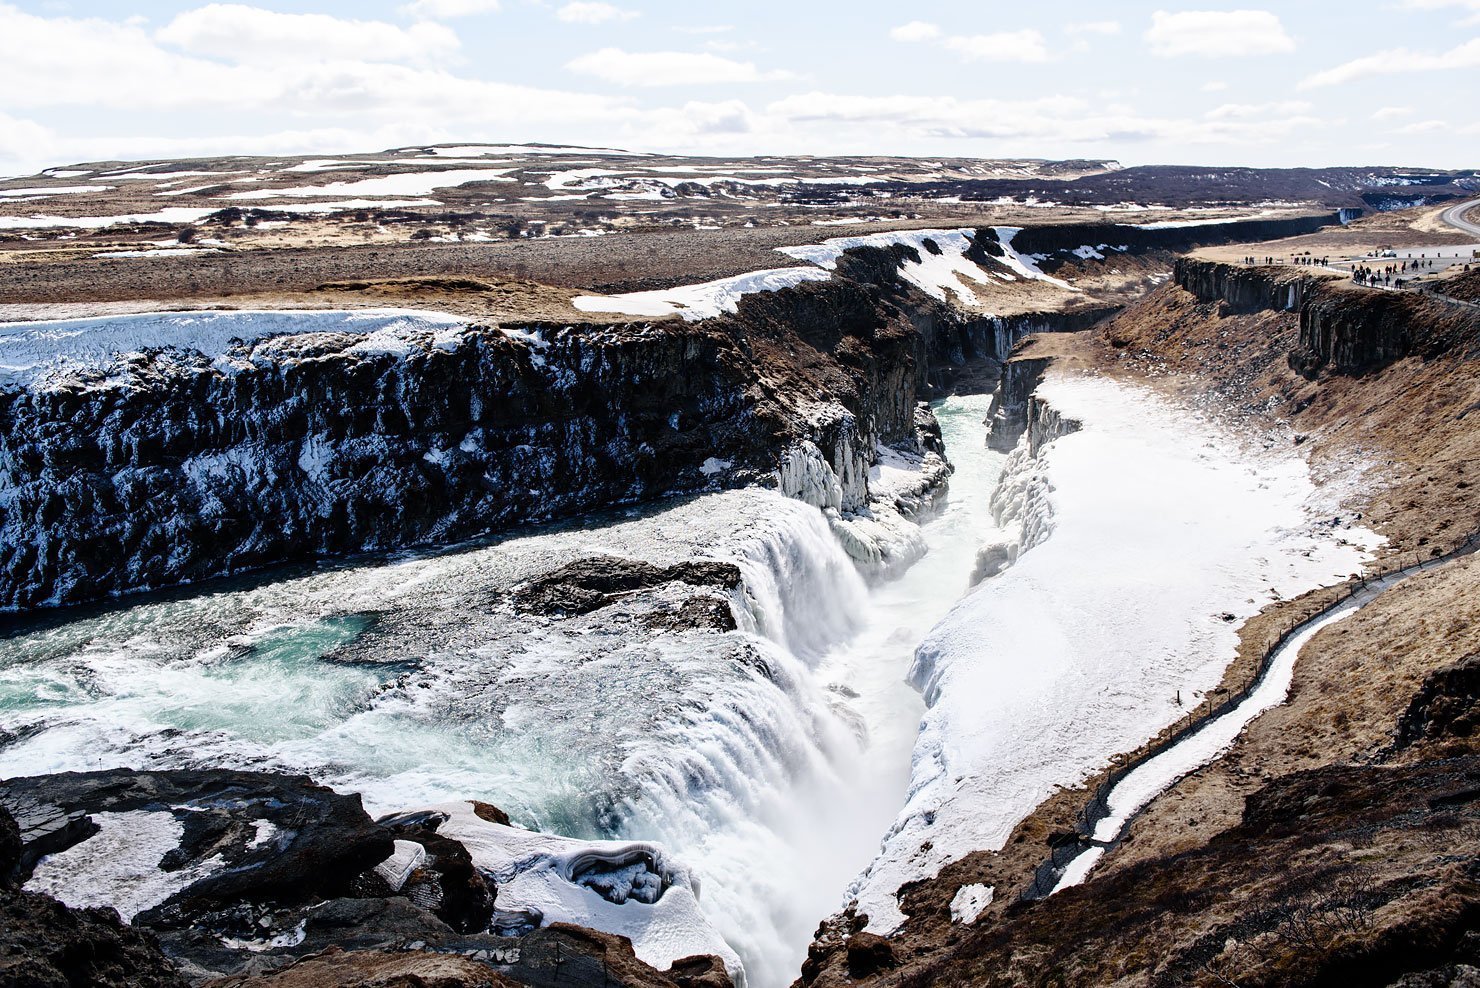 Road Trip in Iceland - The Golden Circle. Gullfoss Waterfall.